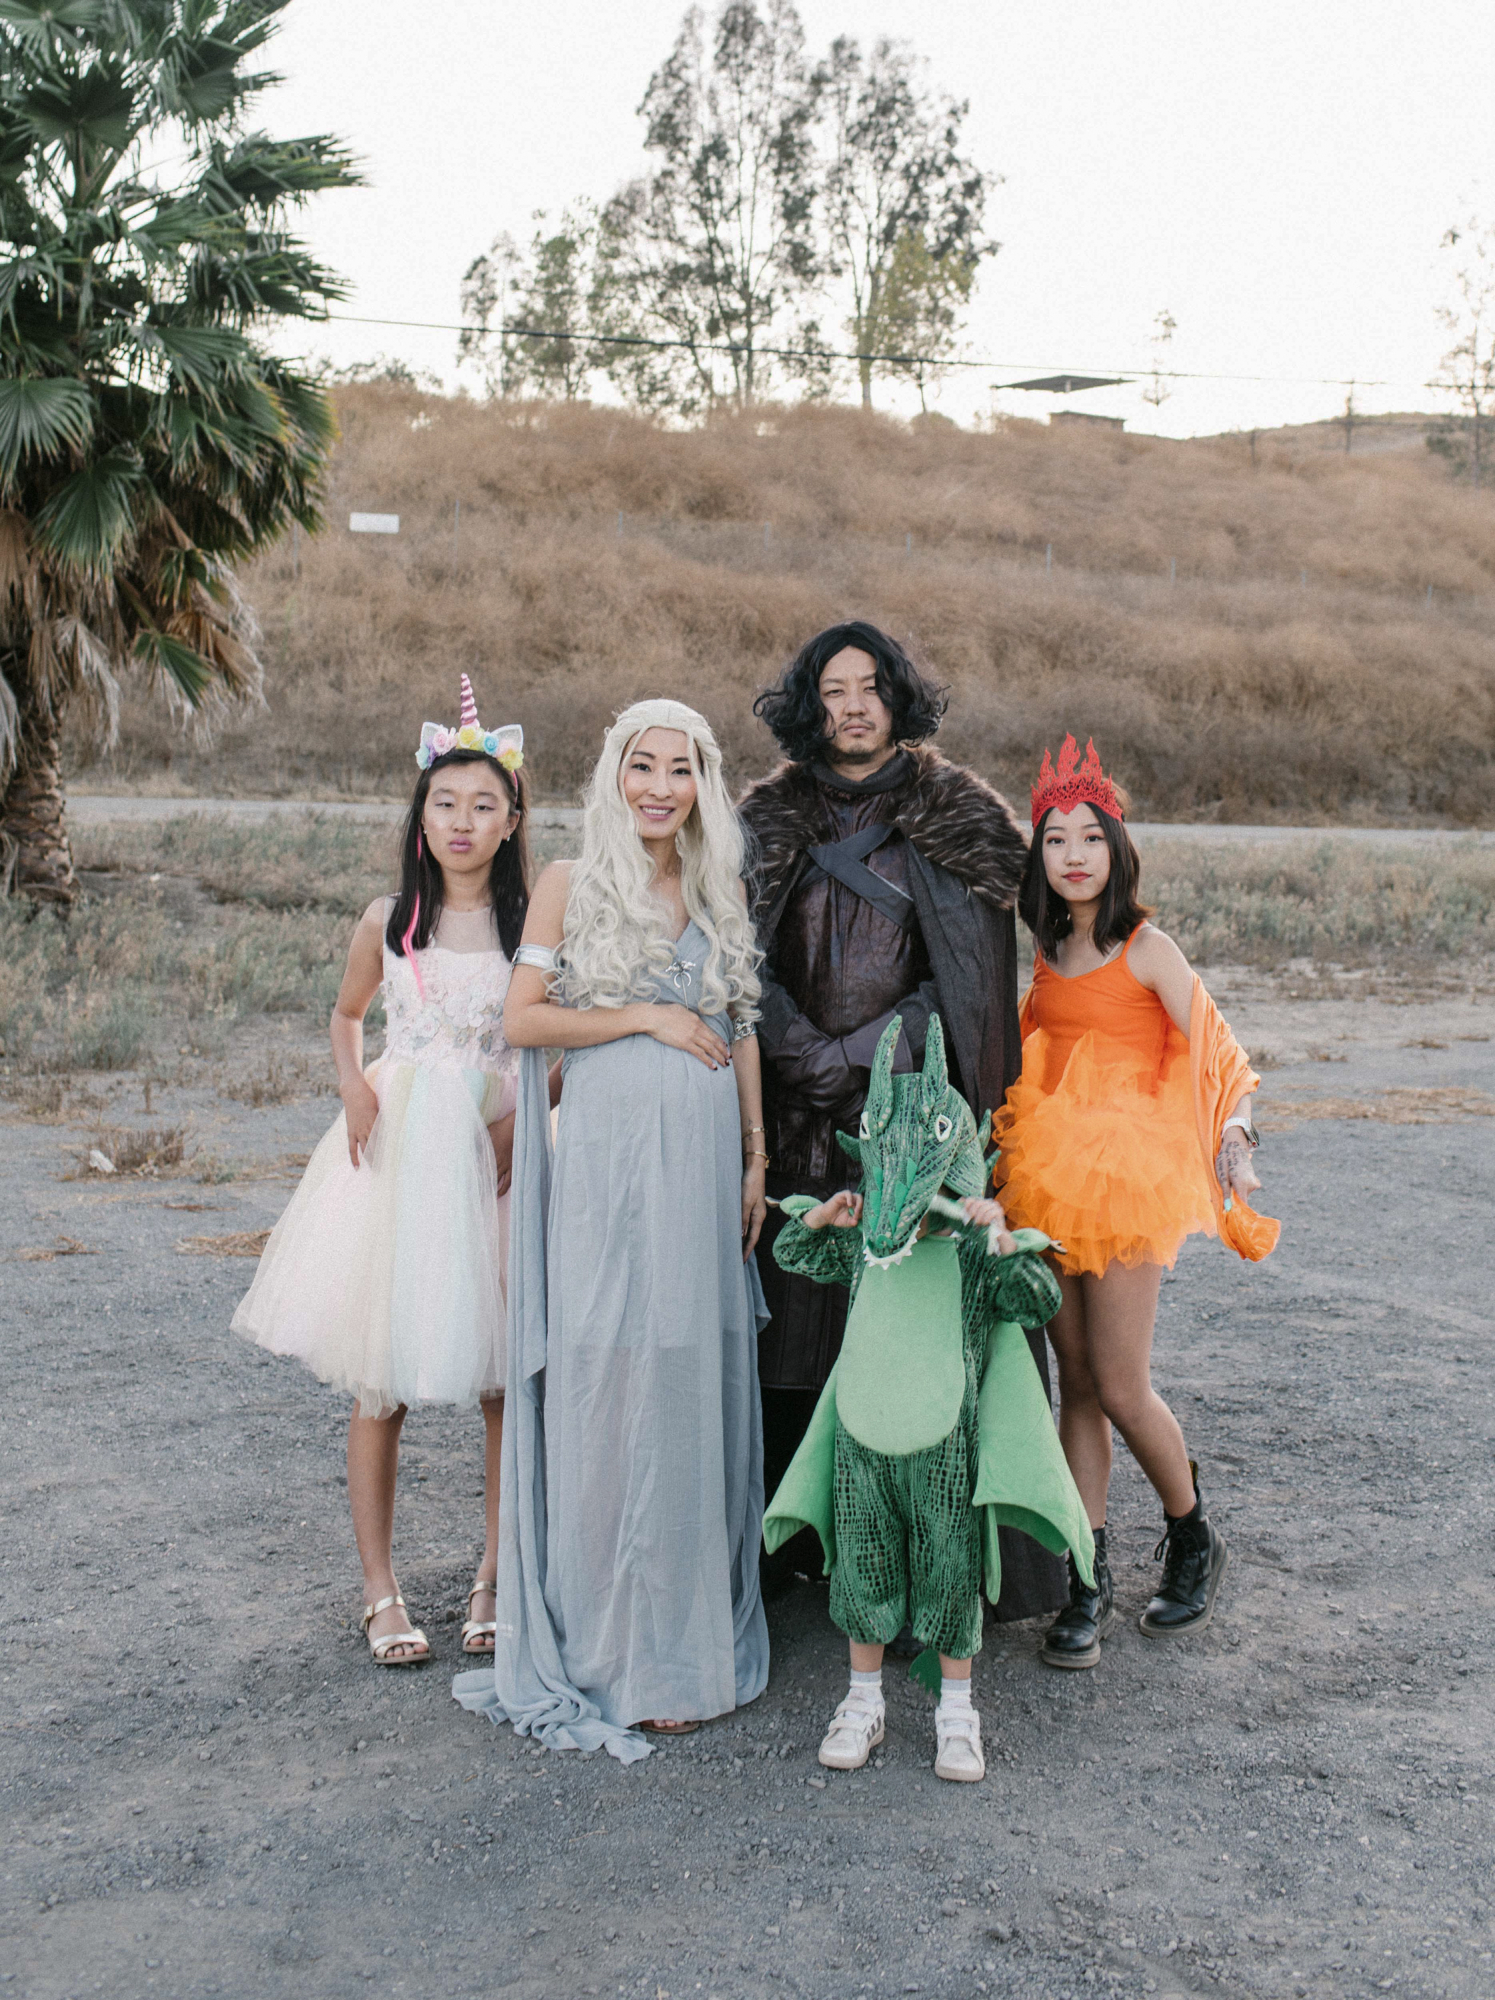 Game of Thrones costume for families